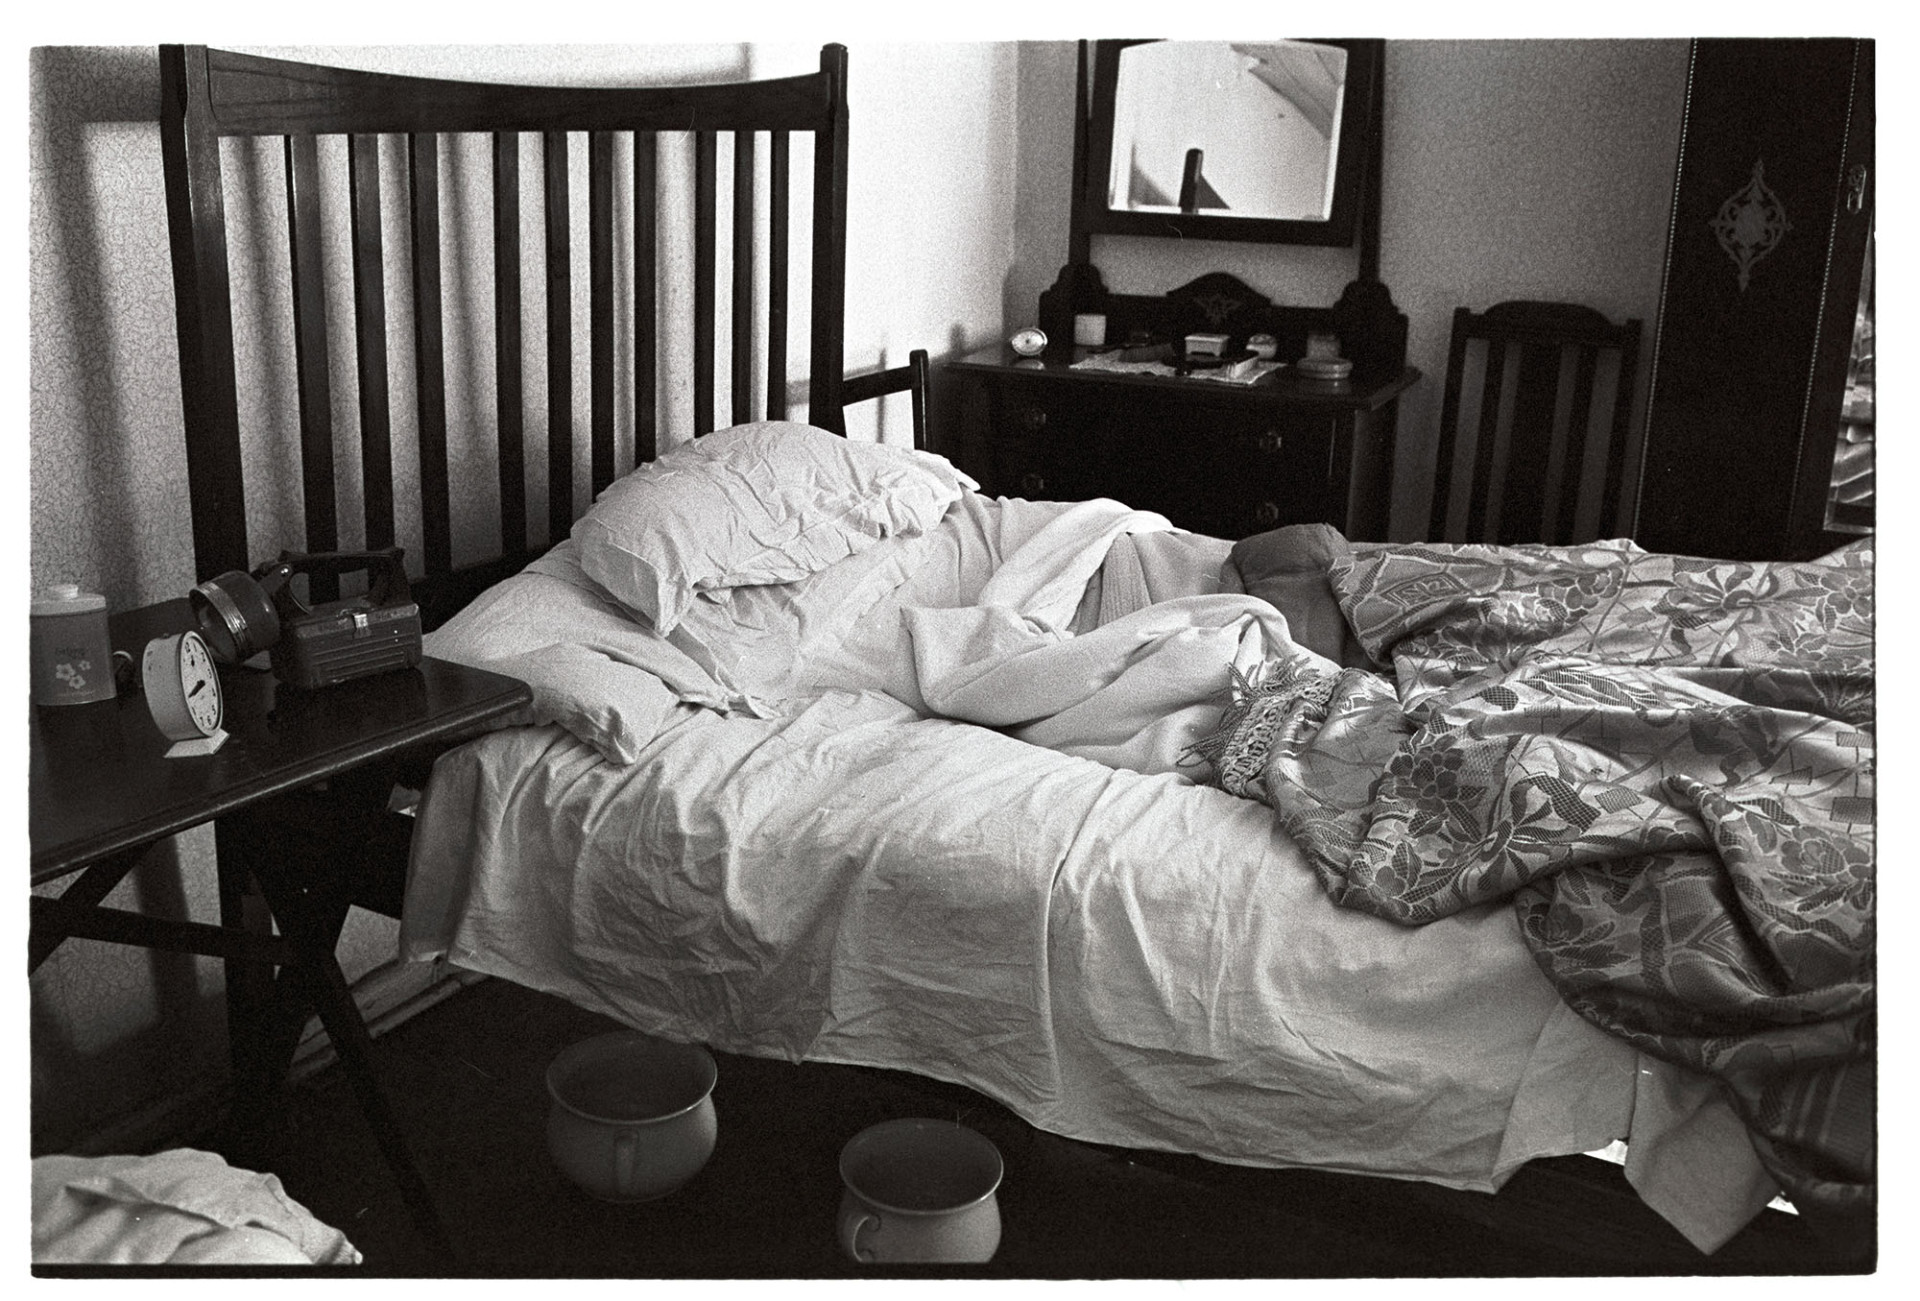 Unmade bed with chamber pots.
[An unmade bed in Archie Parkhouse's bedroom at Millhams, Dolton.  There are two chamber pots beneath the bed, and a dressing table in the background. A torch and alarm clock are on the beside table.]